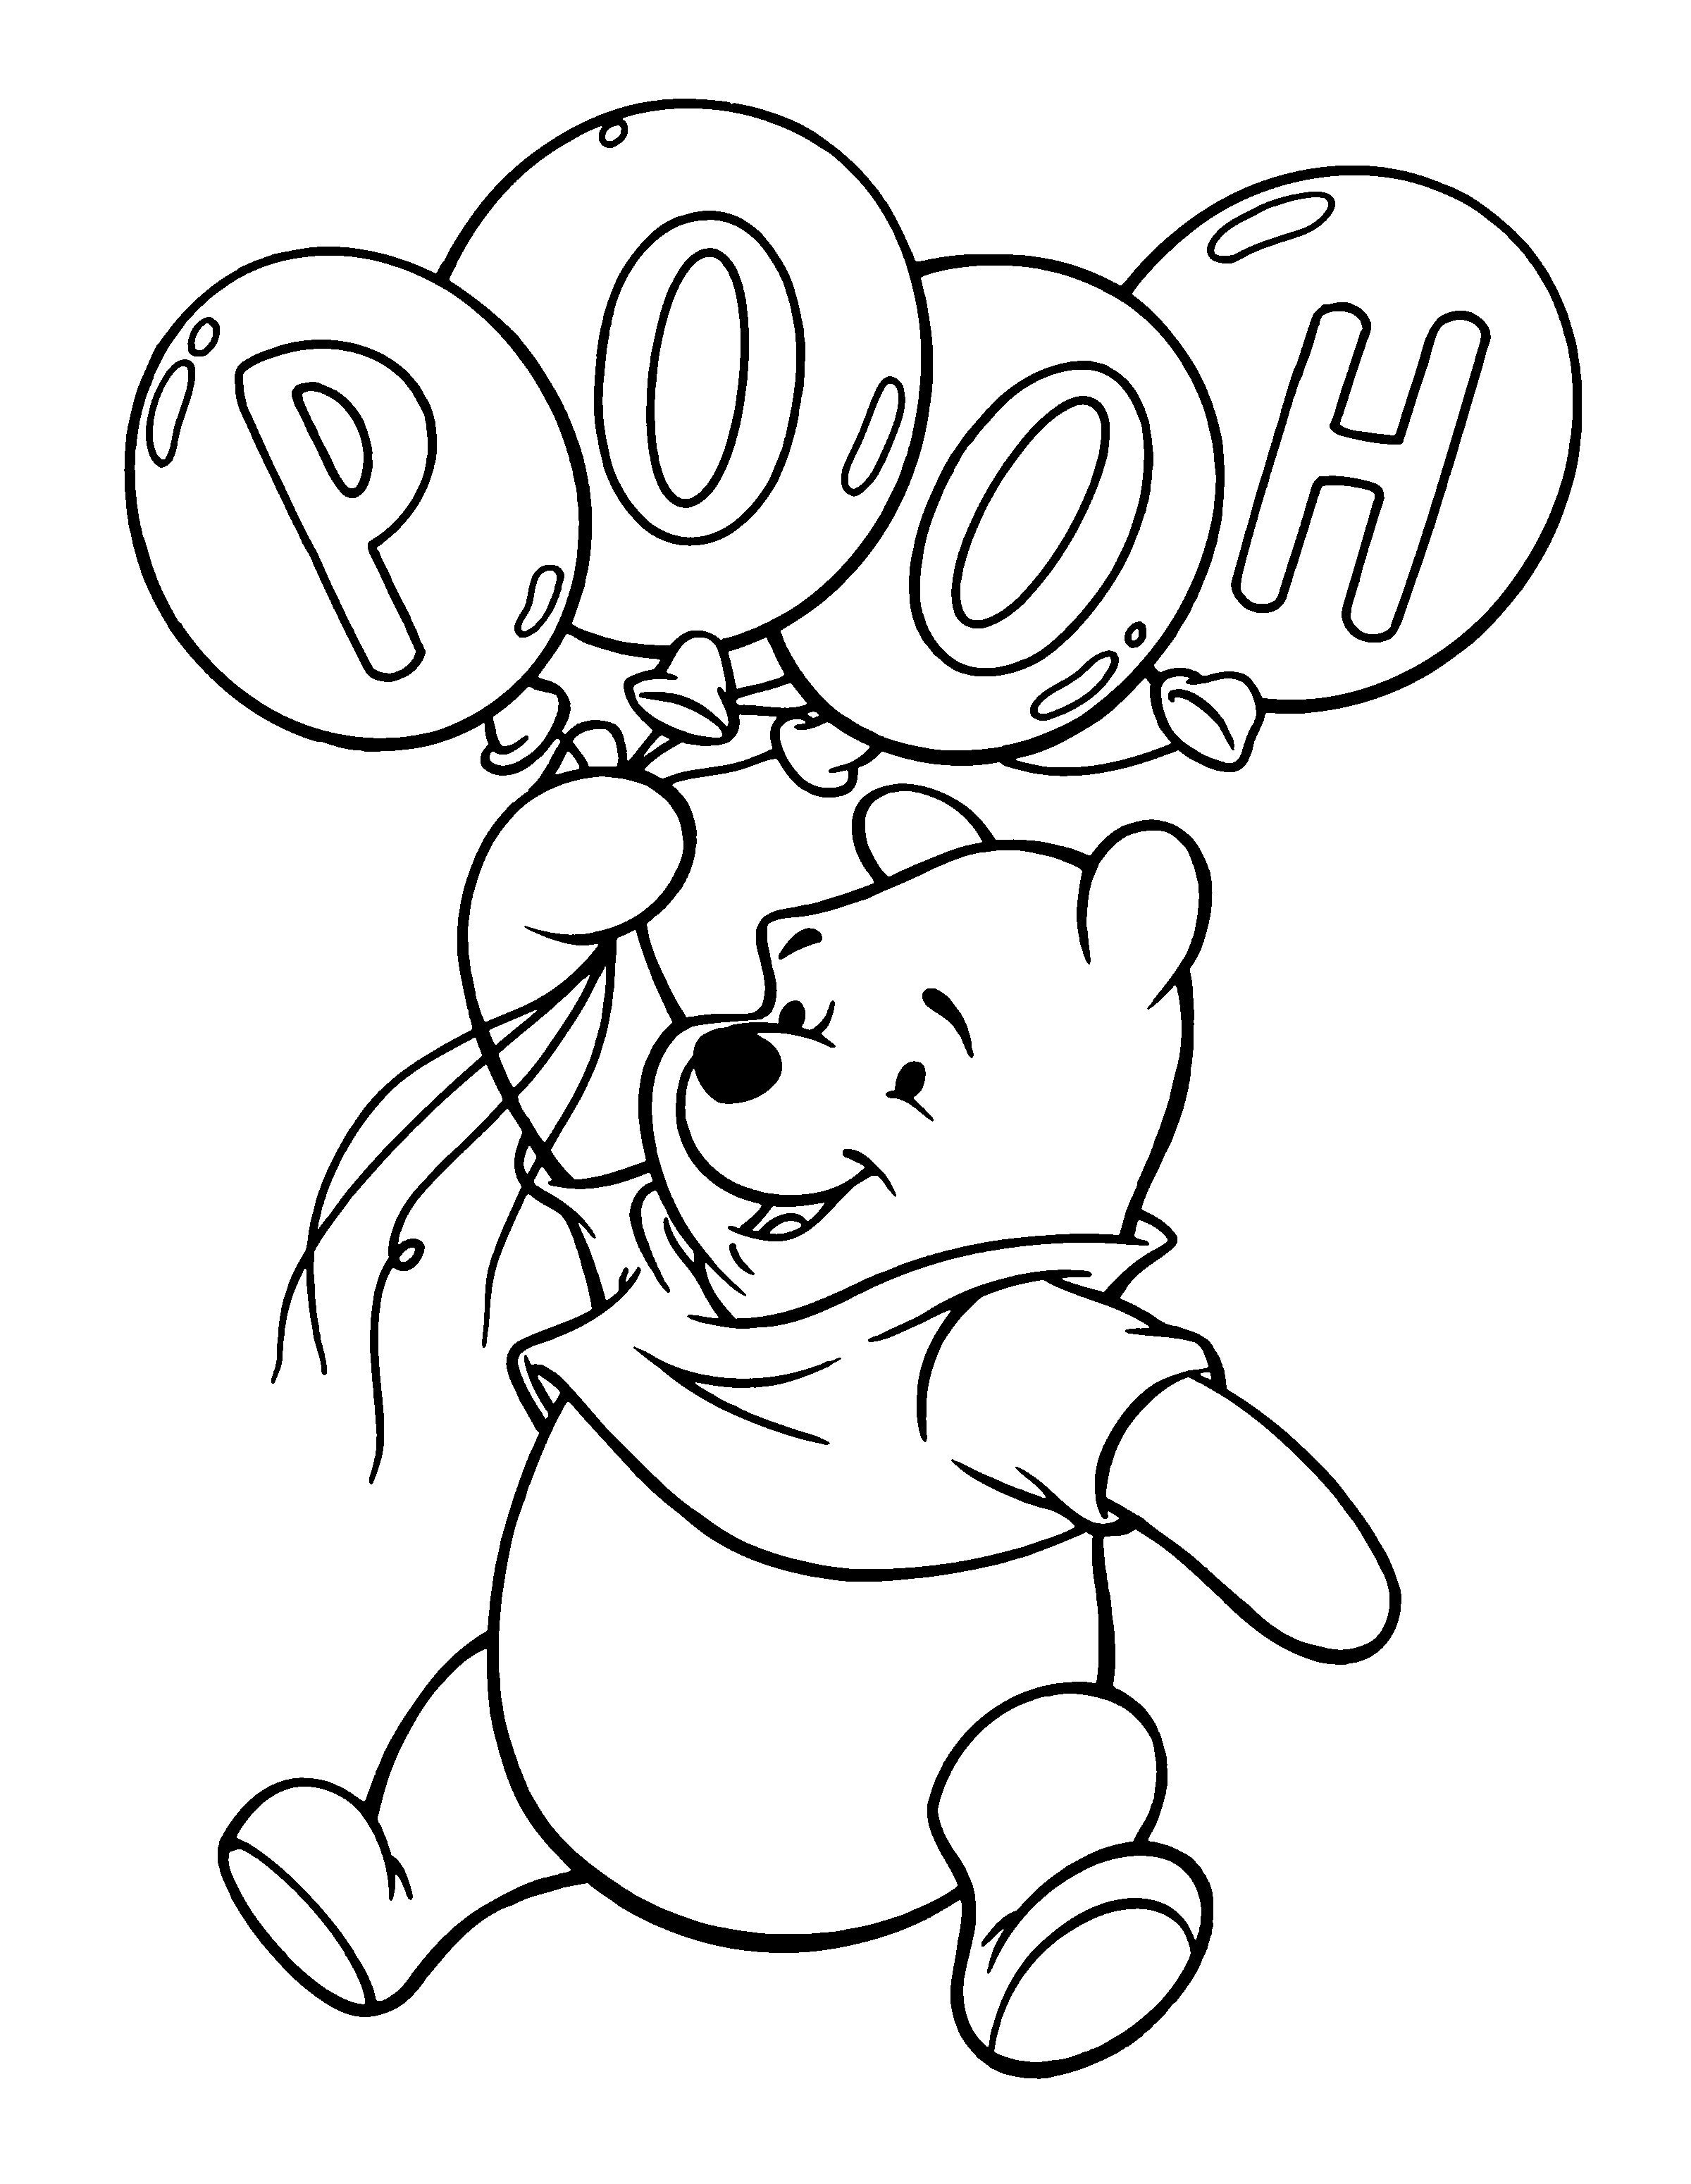 winnie-the-pooh-coloring-pages-14-coloring-kids